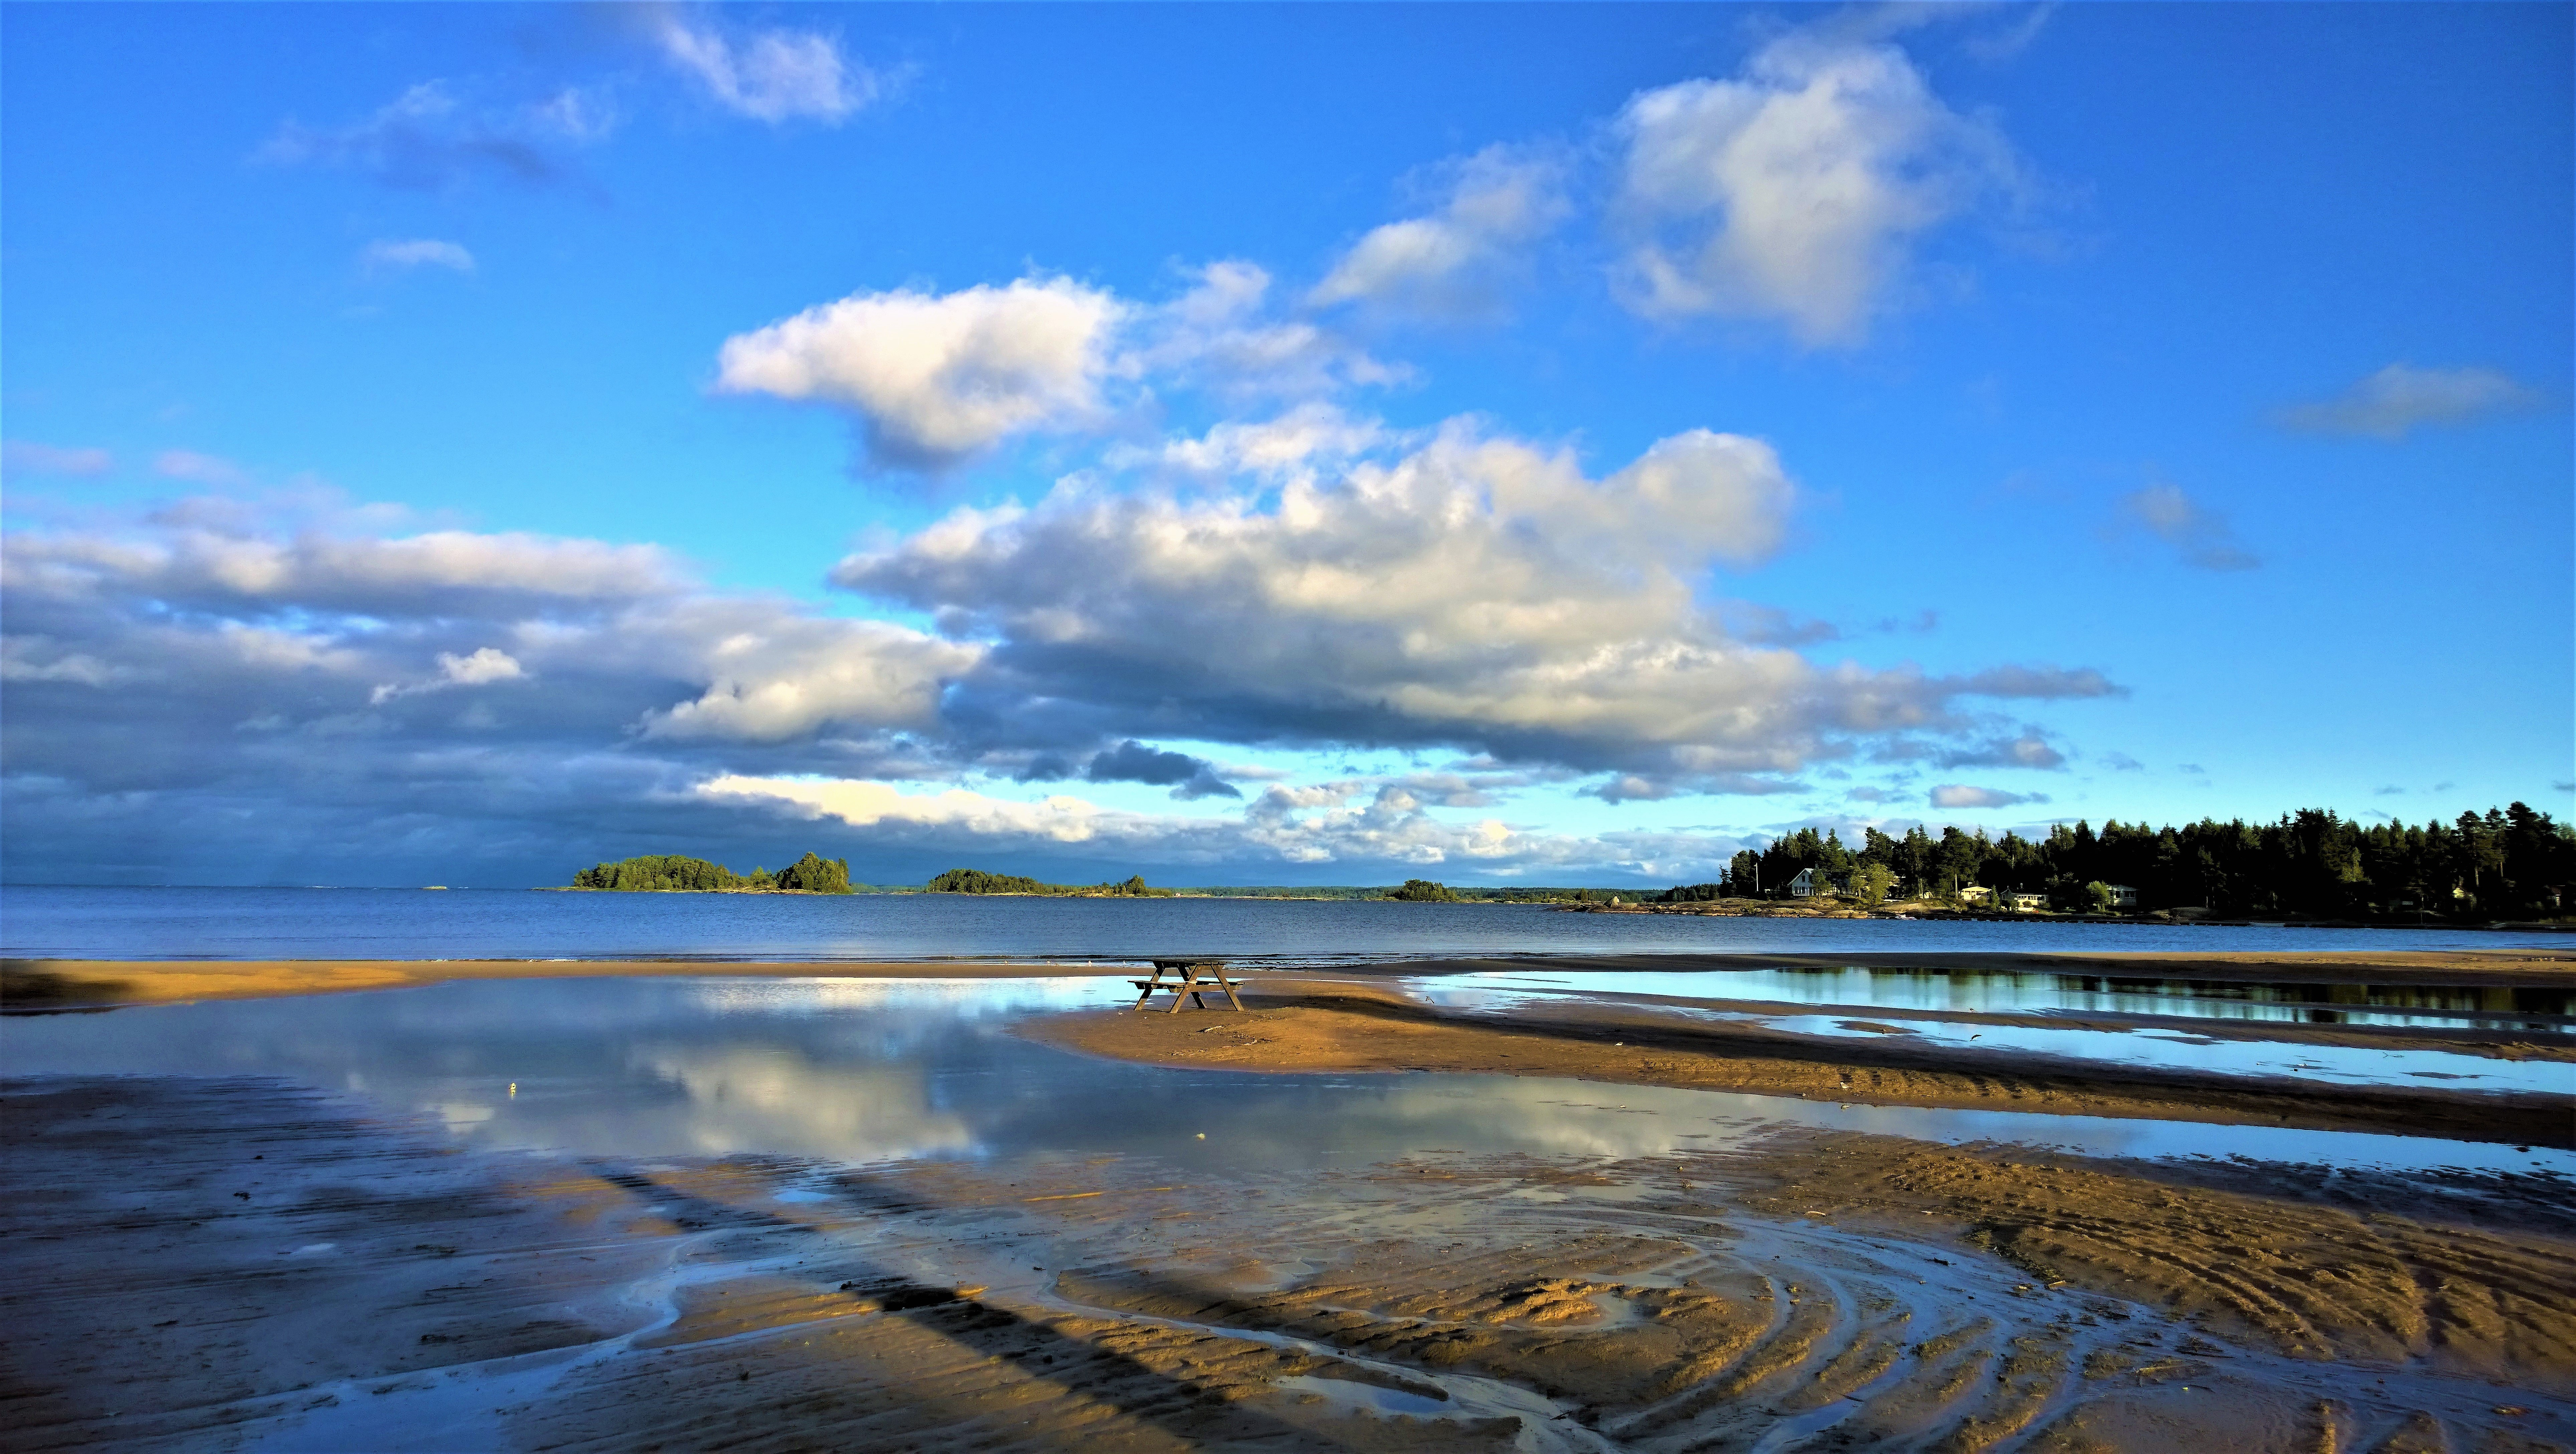 Beach and Sea Landscape in lake Vanern, Sweden image - Free stock ...